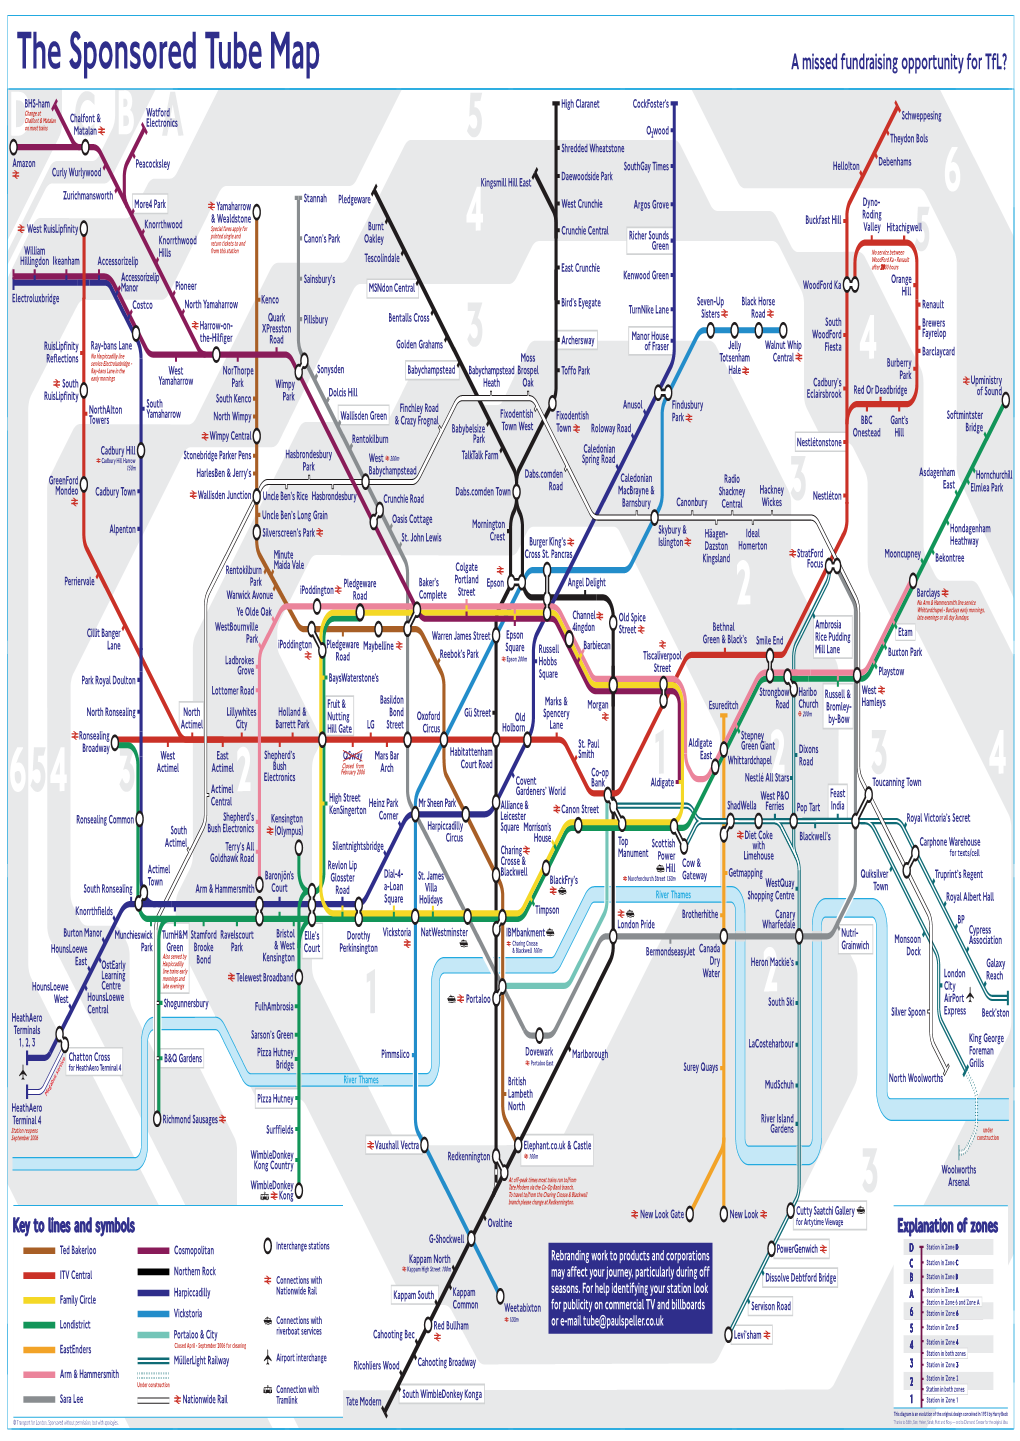 The Sponsored Tube Map a Missed Fundraising Opportunity for Tfl?